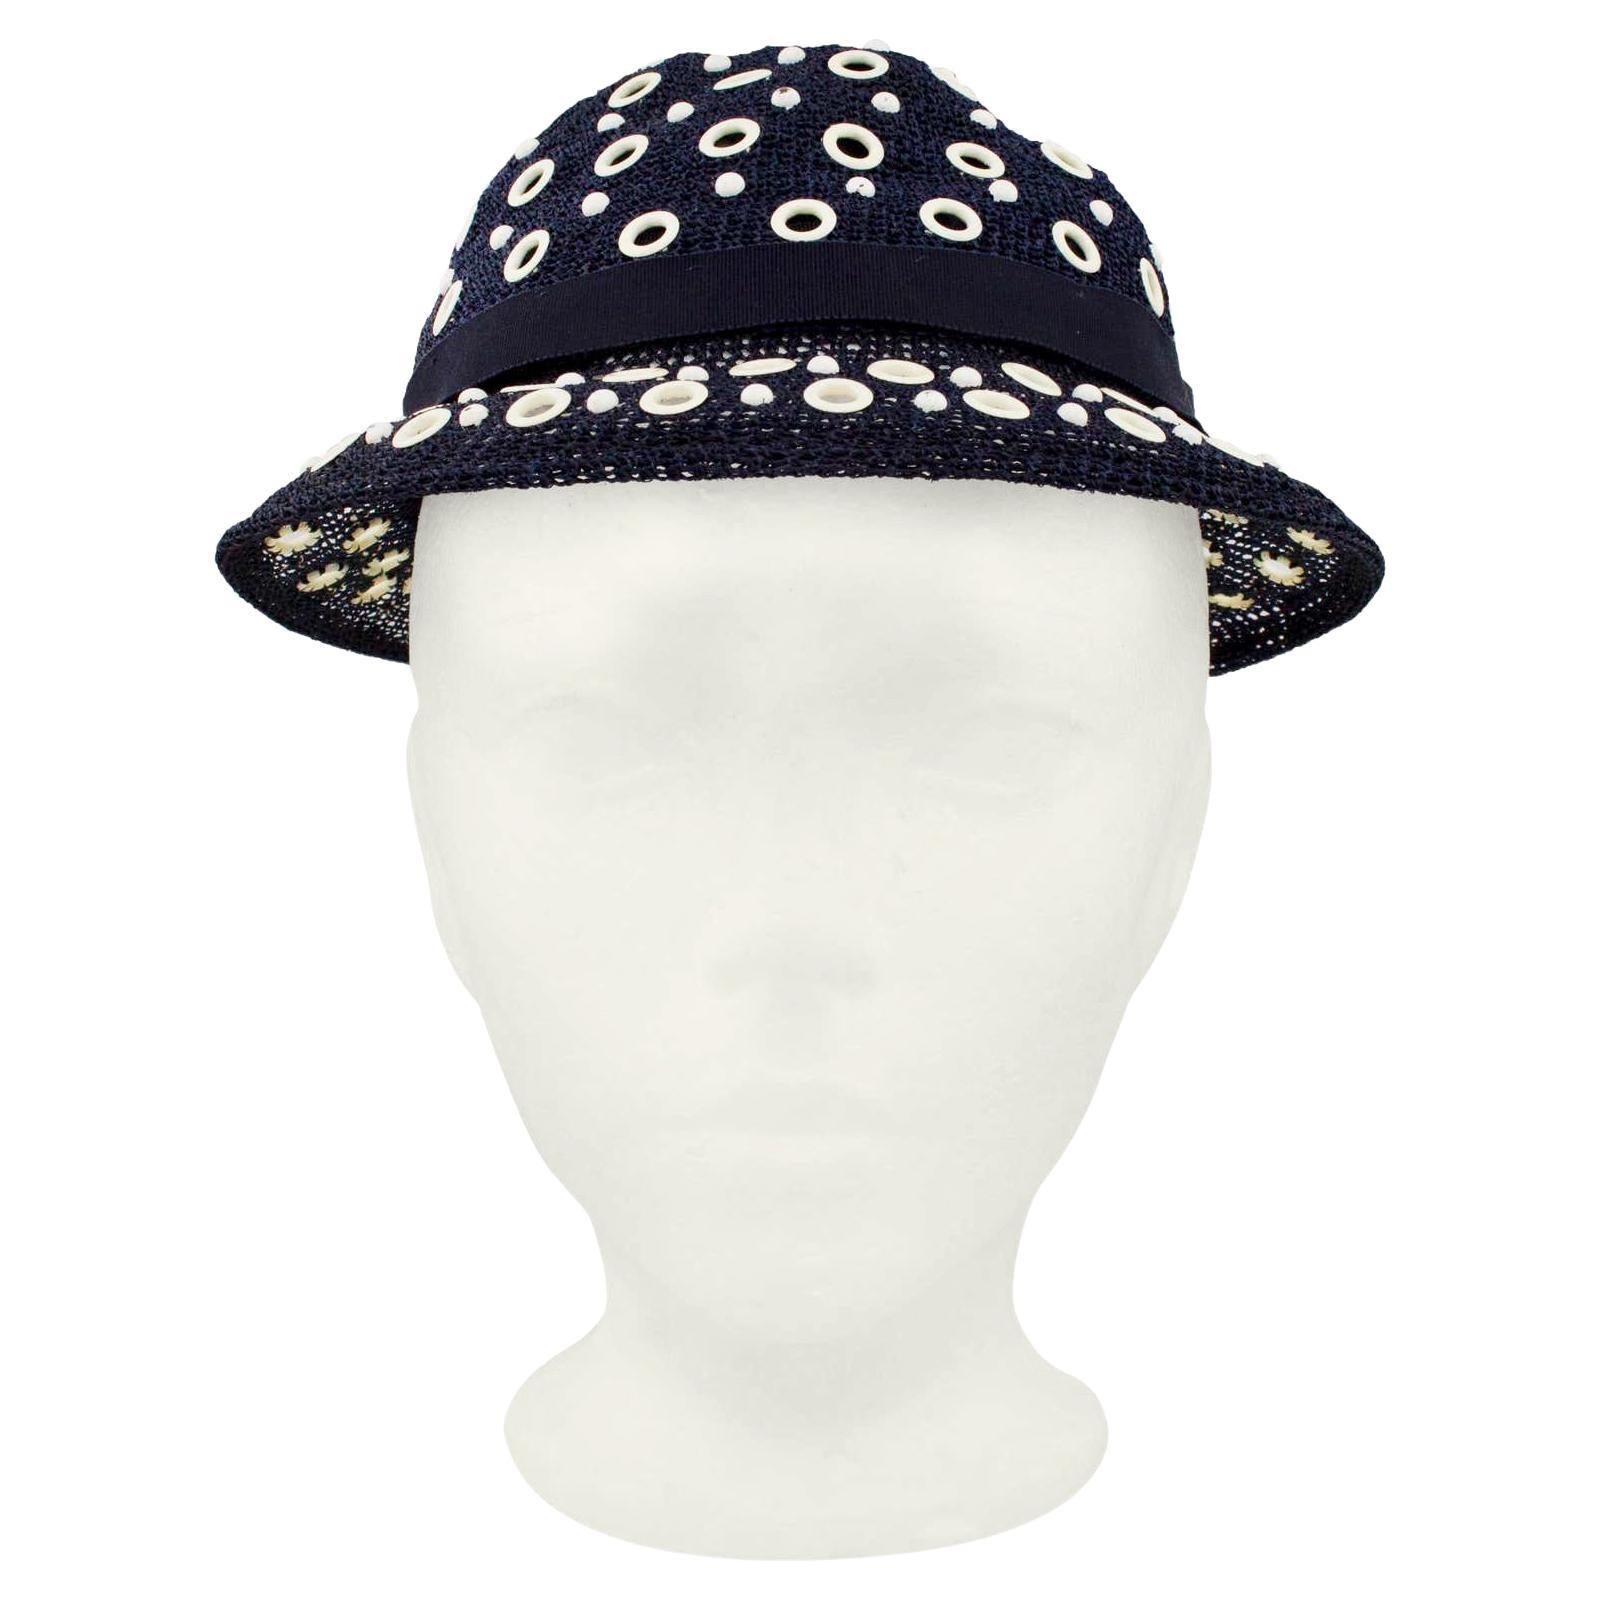 Very charming 1950s bowler style hat from Canadian luxury retailer Holt Renfrew. Navy blue mesh with all over contrasting off white grommets. Accented with a navy blue grosgrain ribbon with a bow at centre back. The hat is quite shallow and sits